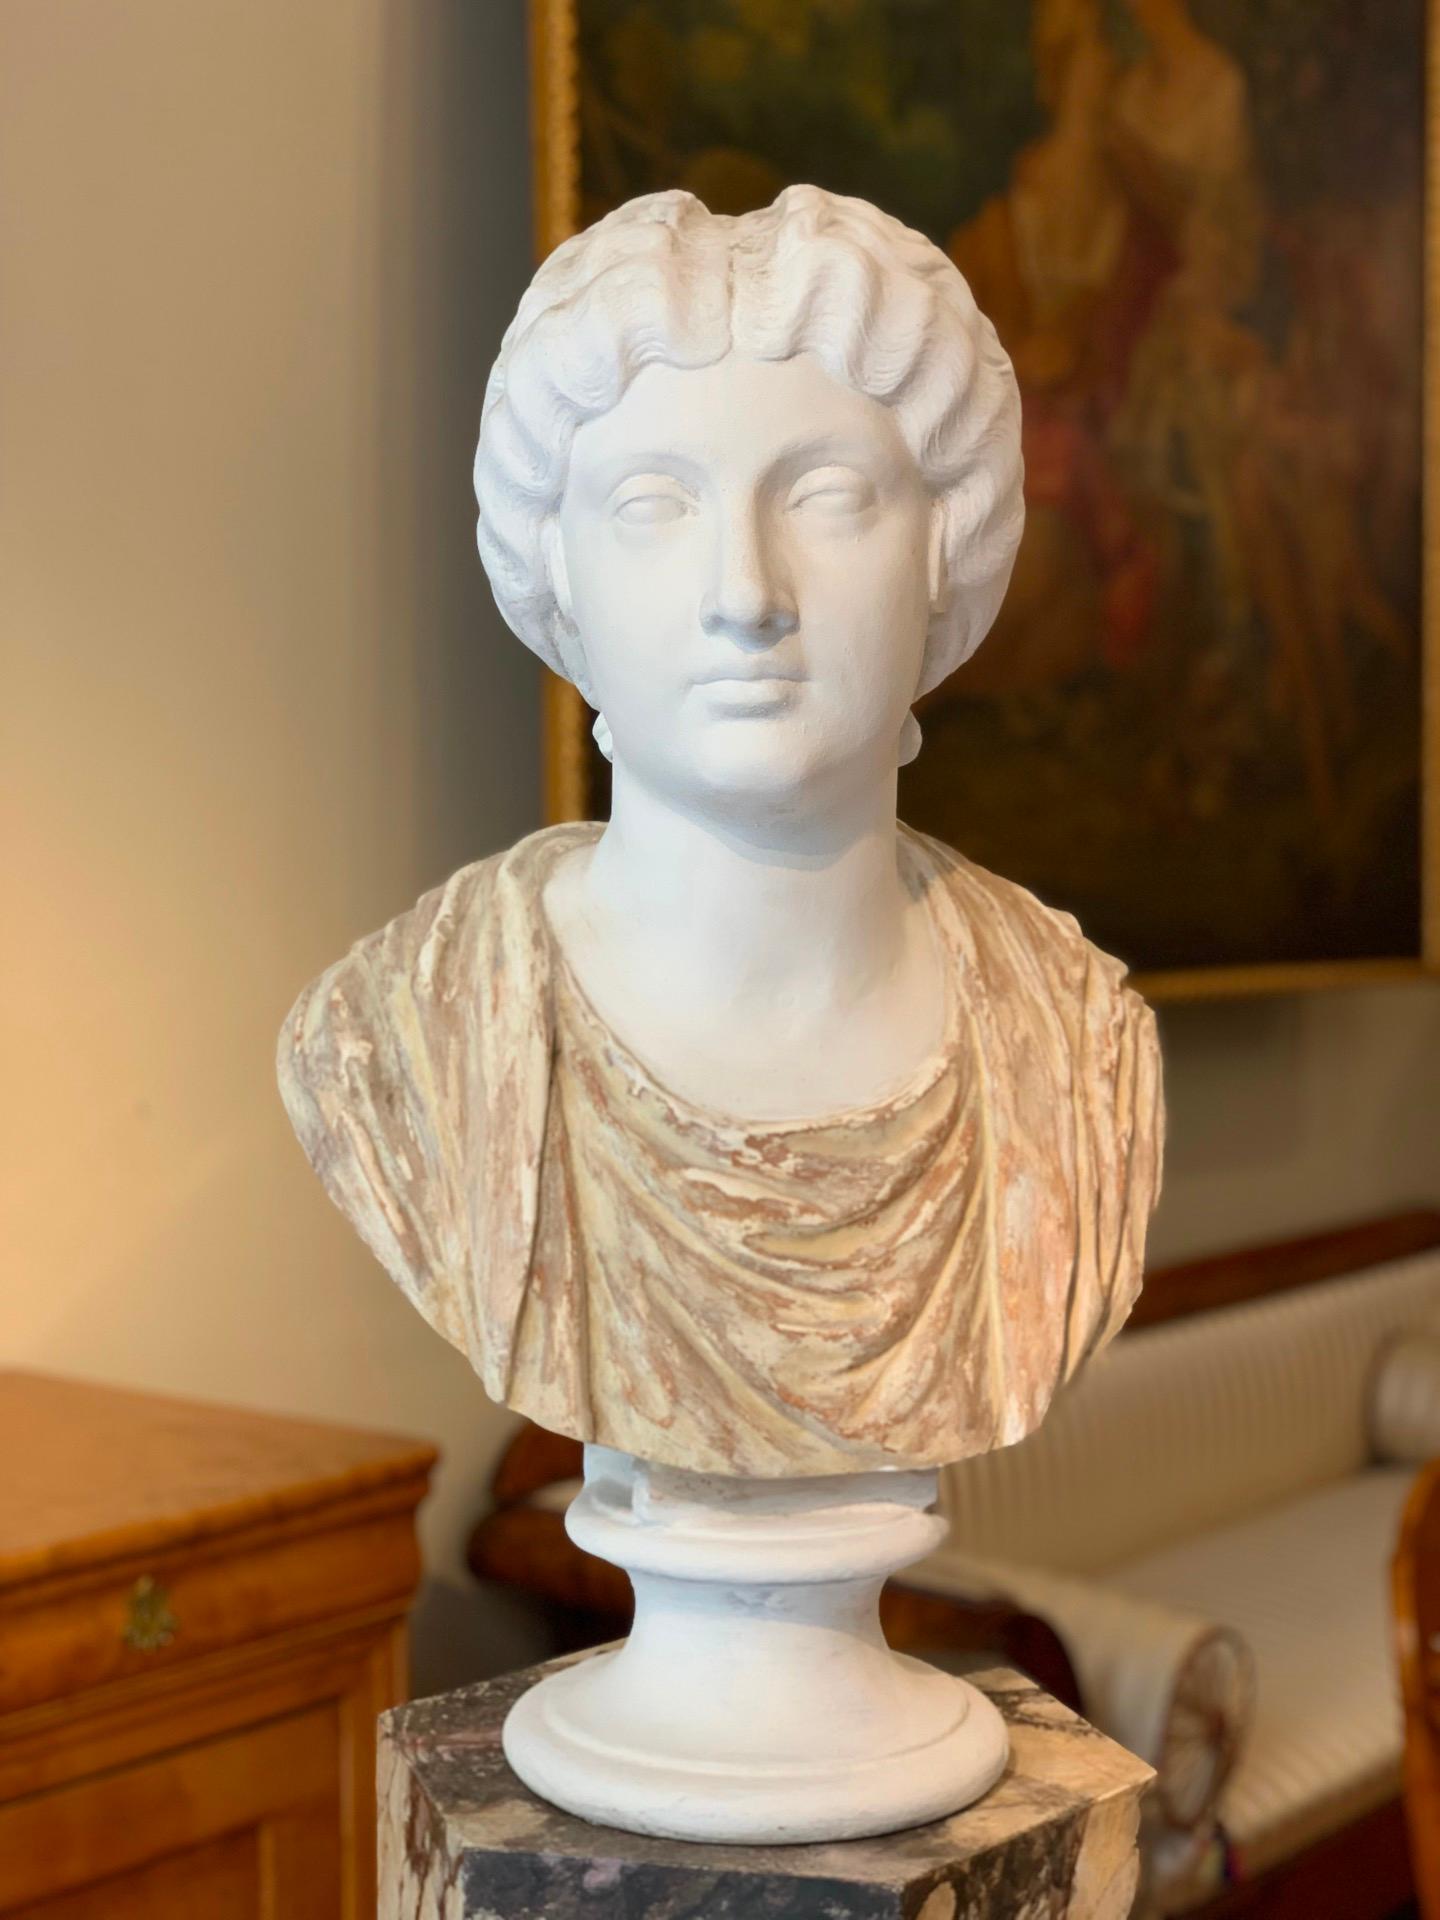 Hand-Crafted 19th CENTURY PAIR OF NEOCLASSICAL BUSTS IN TERRACOTTA AND PLASTER